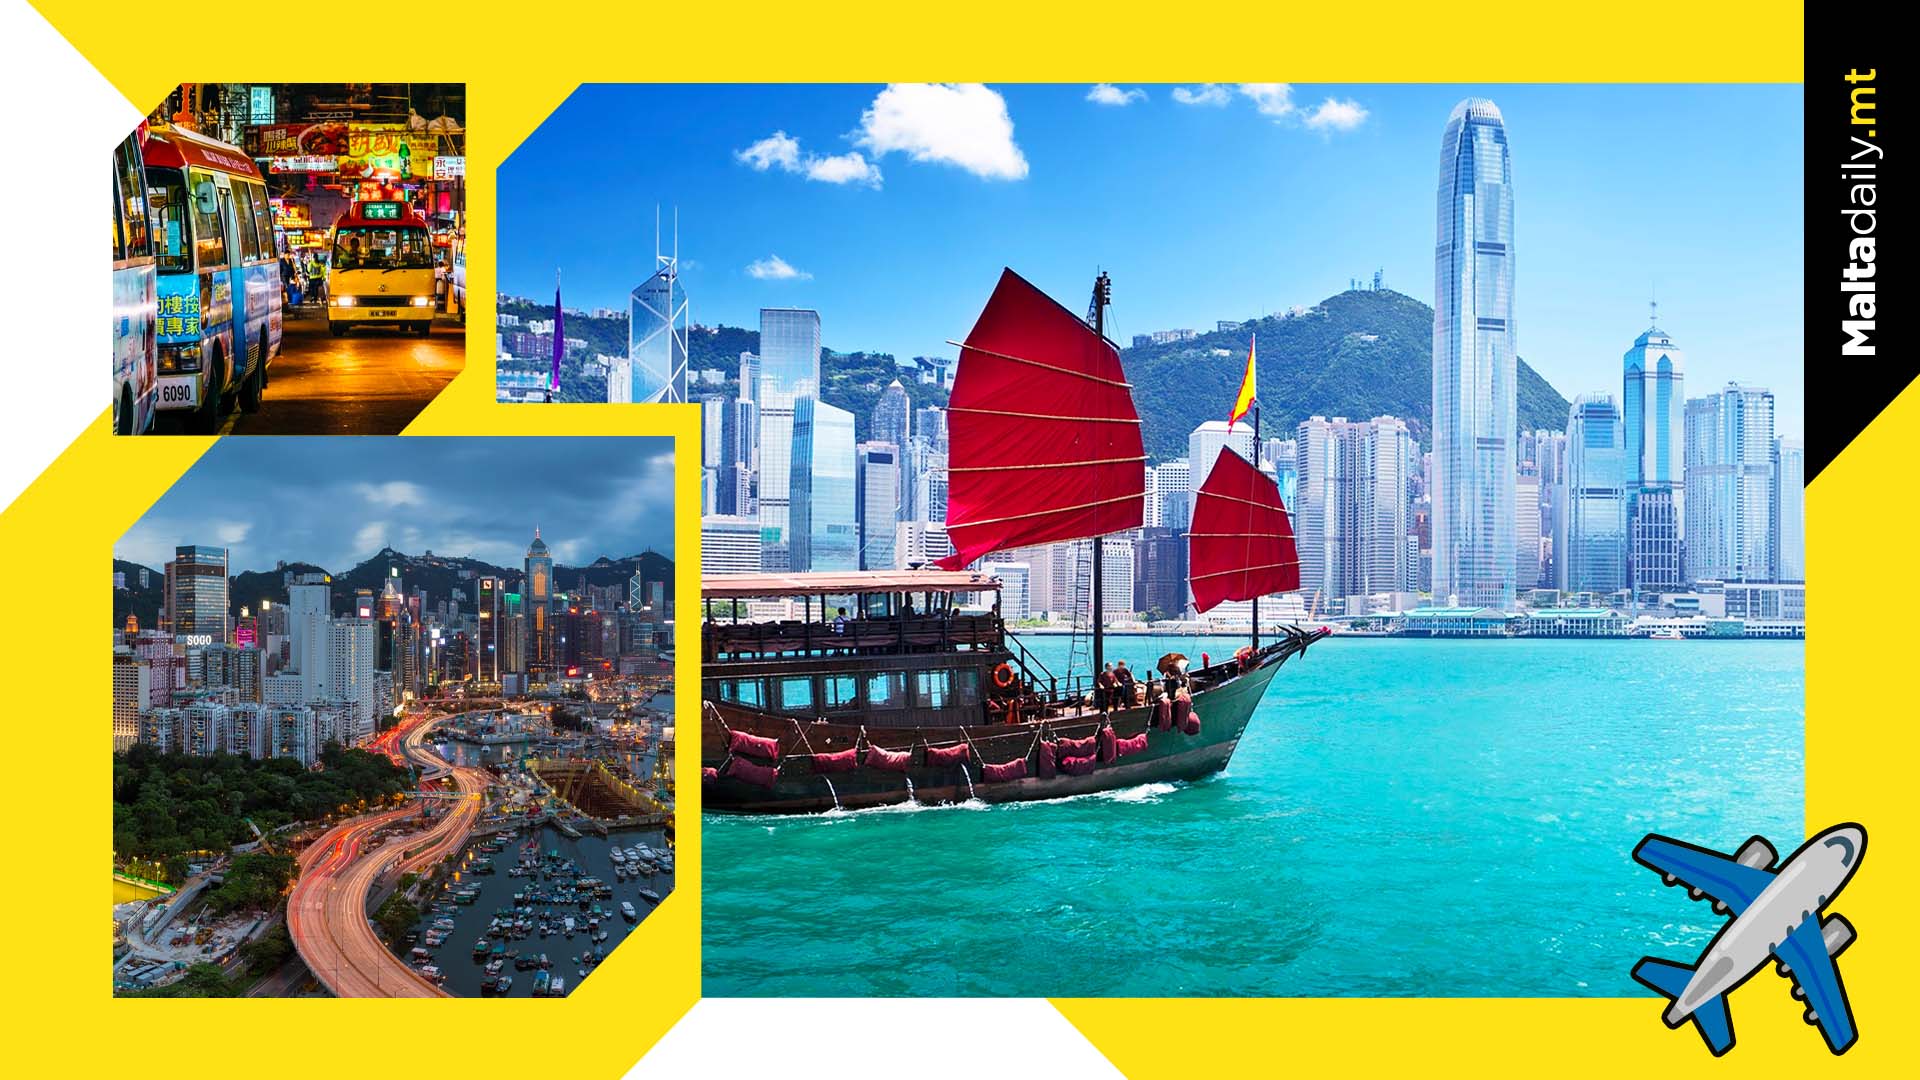 Hong Kong is giving away over 500,000 free flight tickets